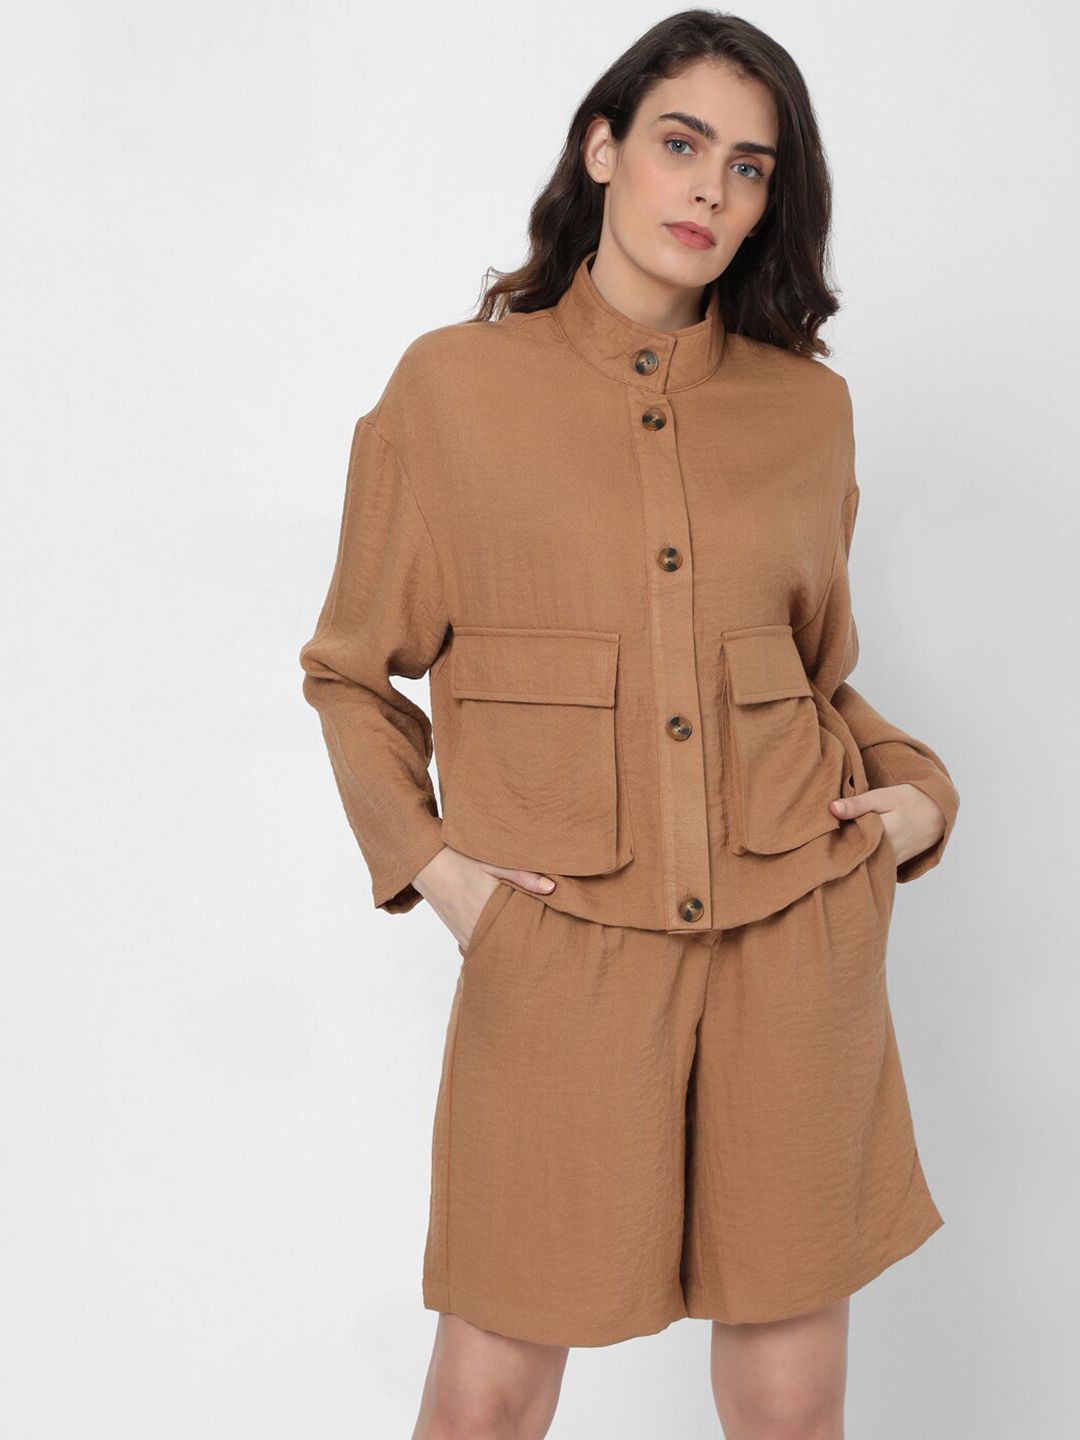 Vero Moda Women Brown Viscose Rayon Lightweight Tailored Jacket with Oversized Pockets Price in India